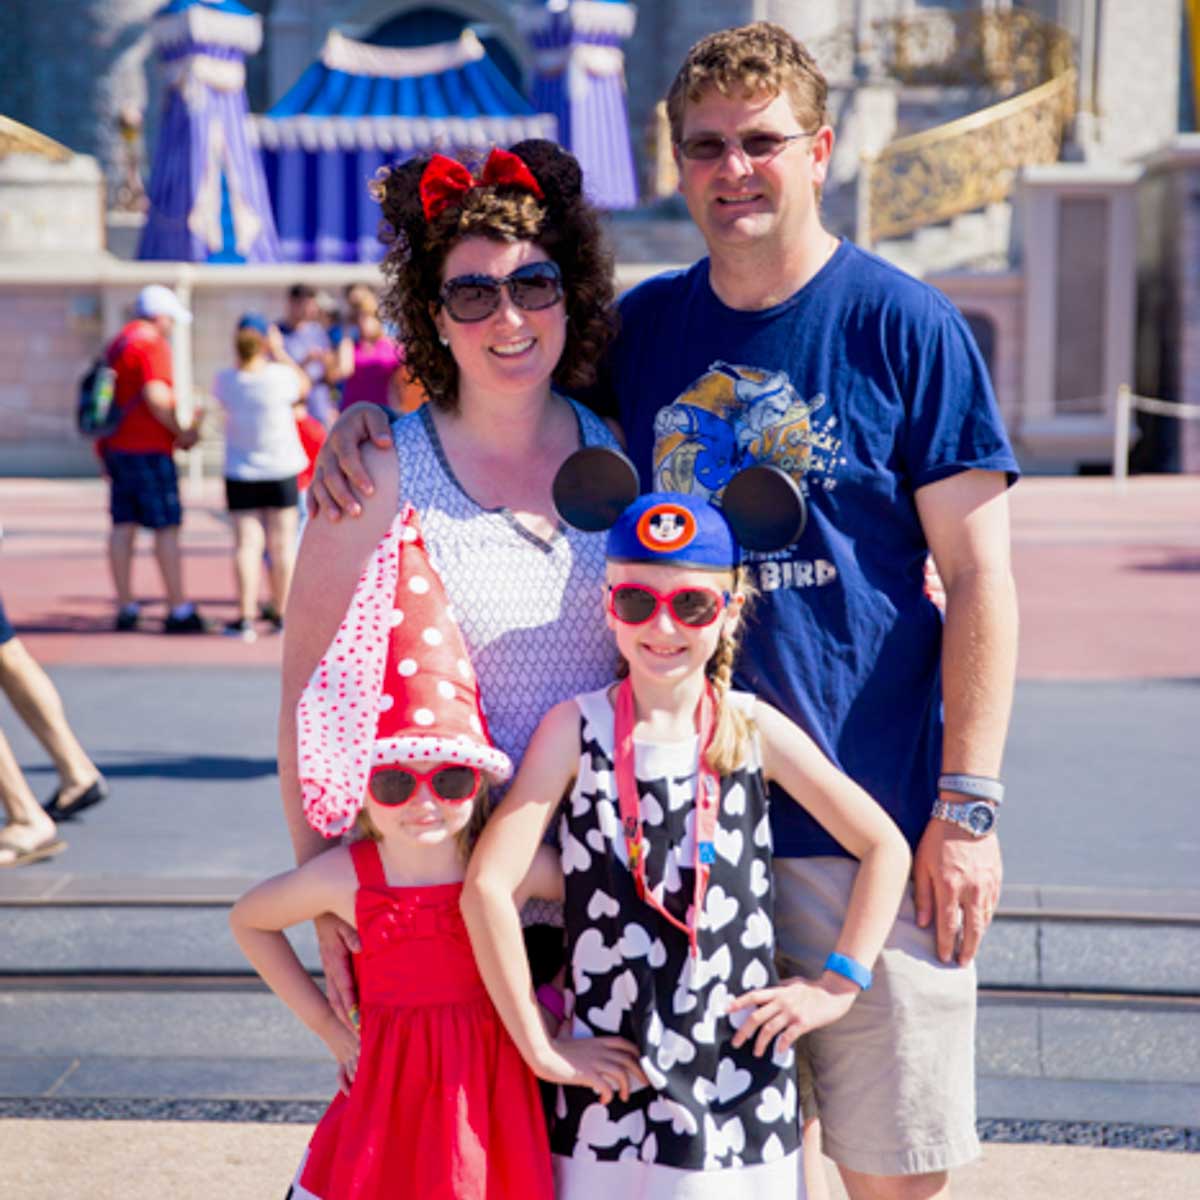 We're Going to Disney!' How to Surprise Your Kids with a Disney Trip